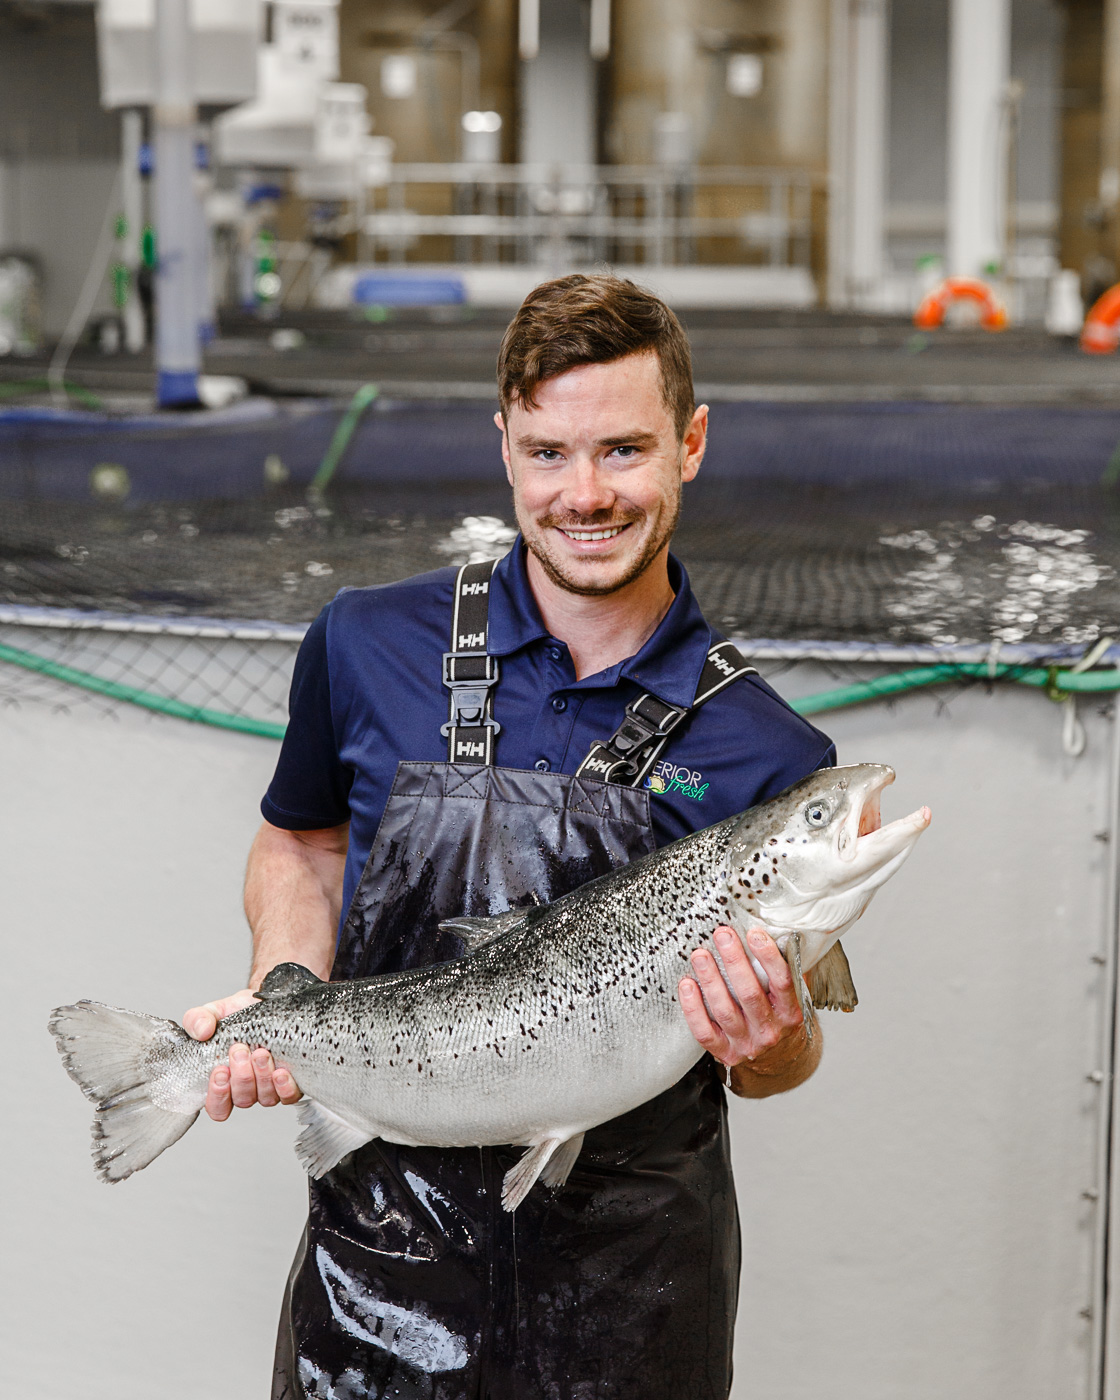 Kyle Woolever, aquaculture manager at Superior Fresh based in Hixton, WI holds a farm raised salmon.